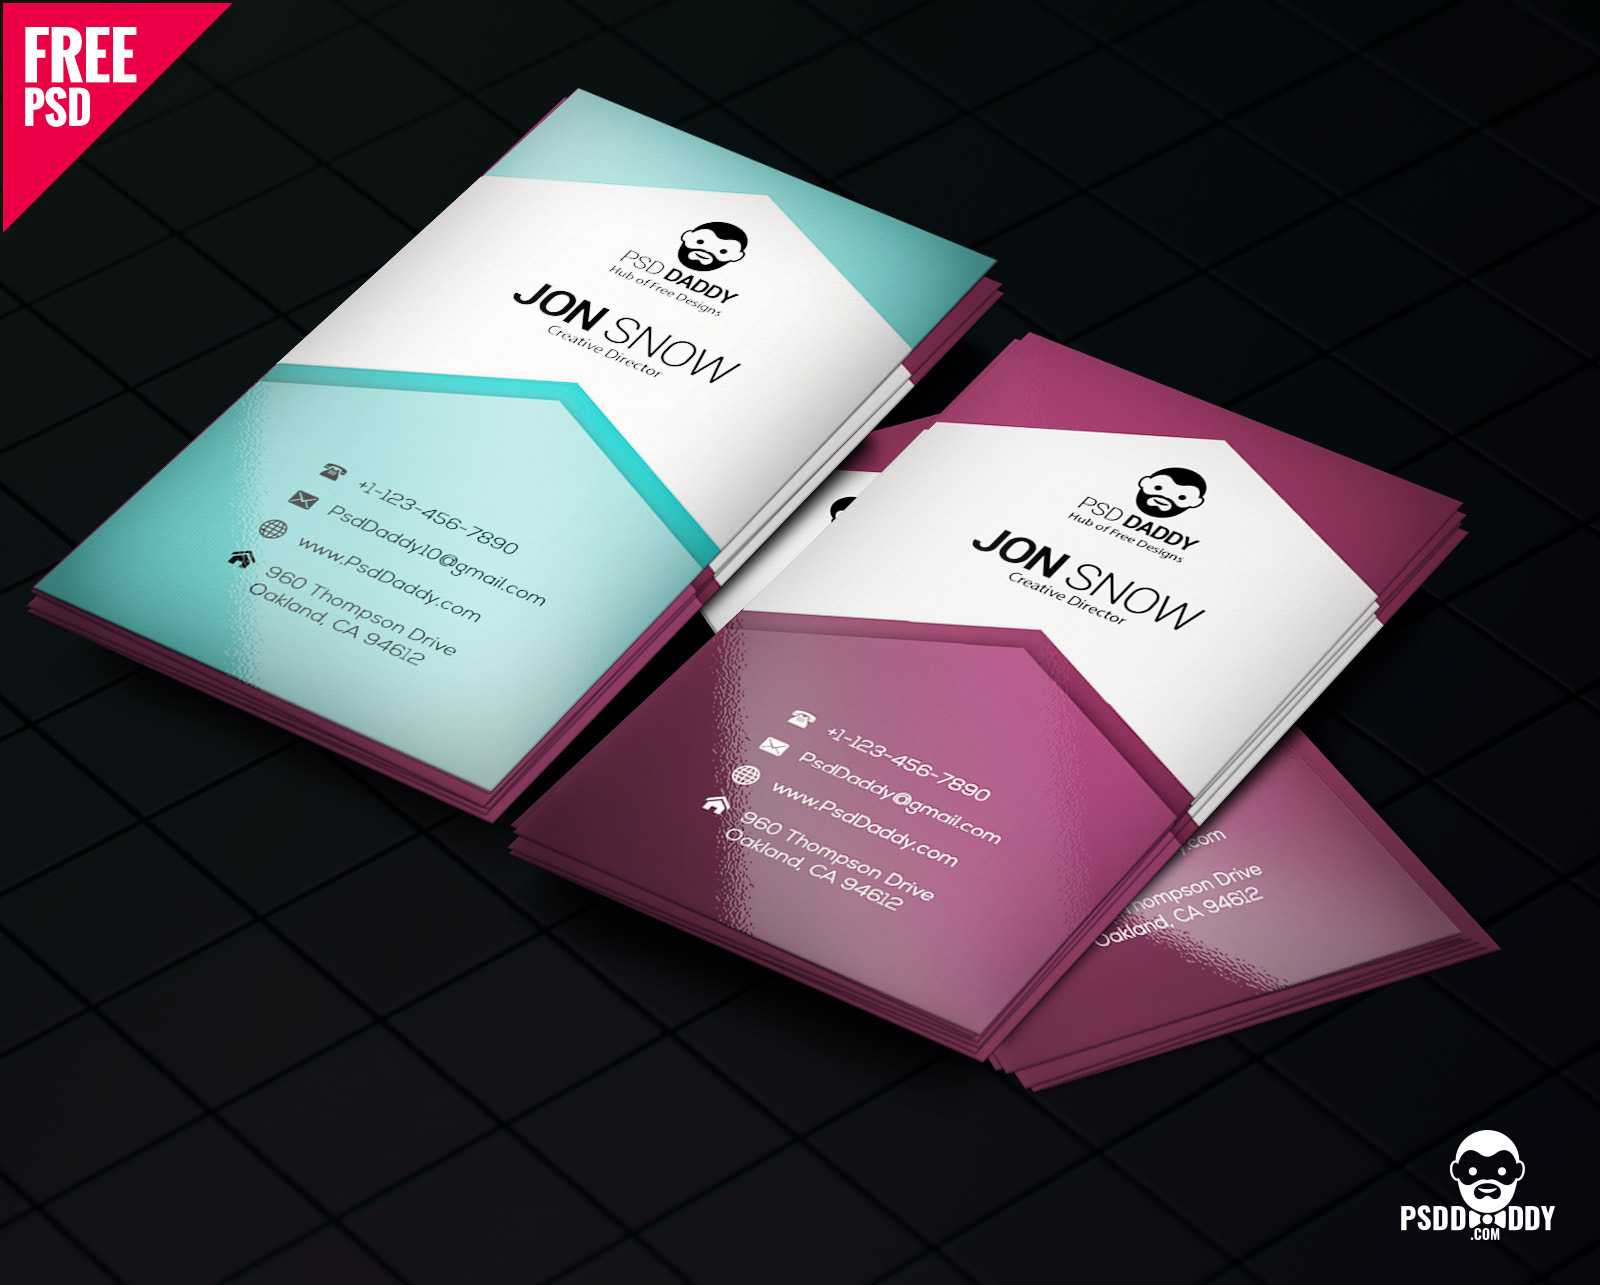 Download]Creative Business Card Psd Free | Psddaddy For Business Card Size Psd Template